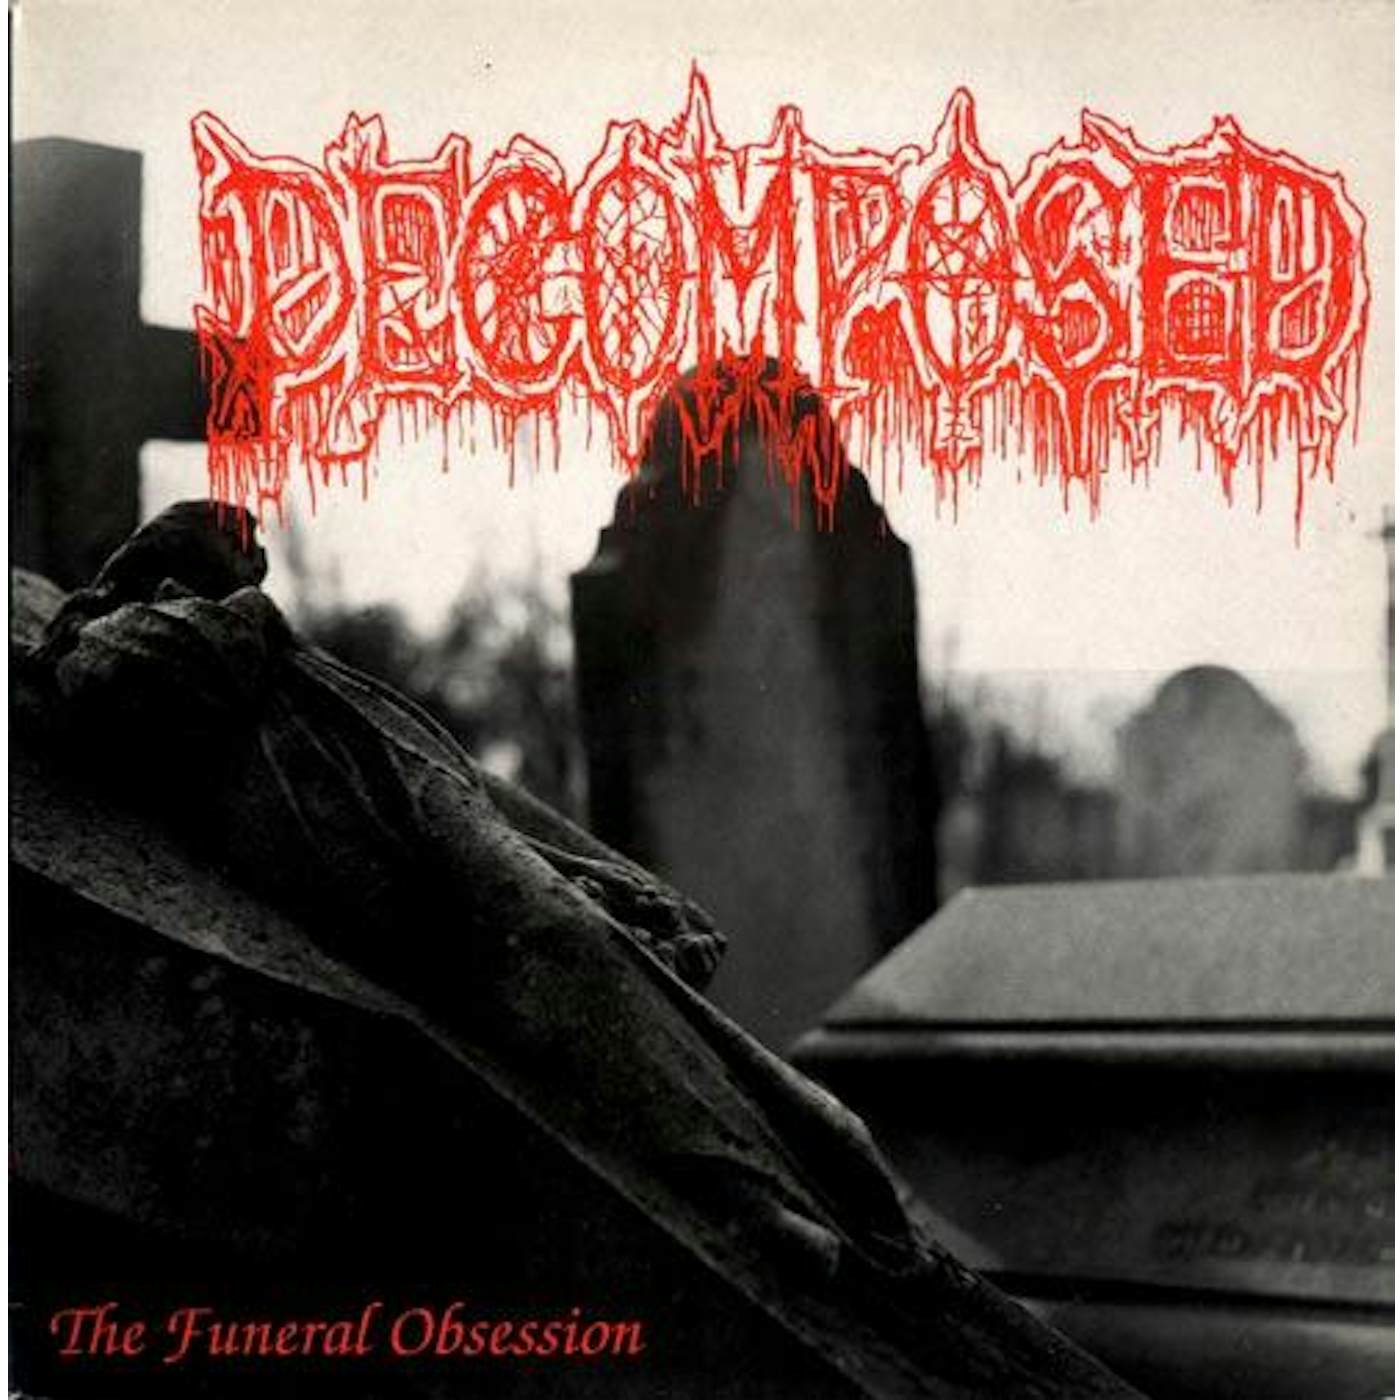 Decomposed 'The Funeral Obsession' Vinyl 12" Vinyl Record